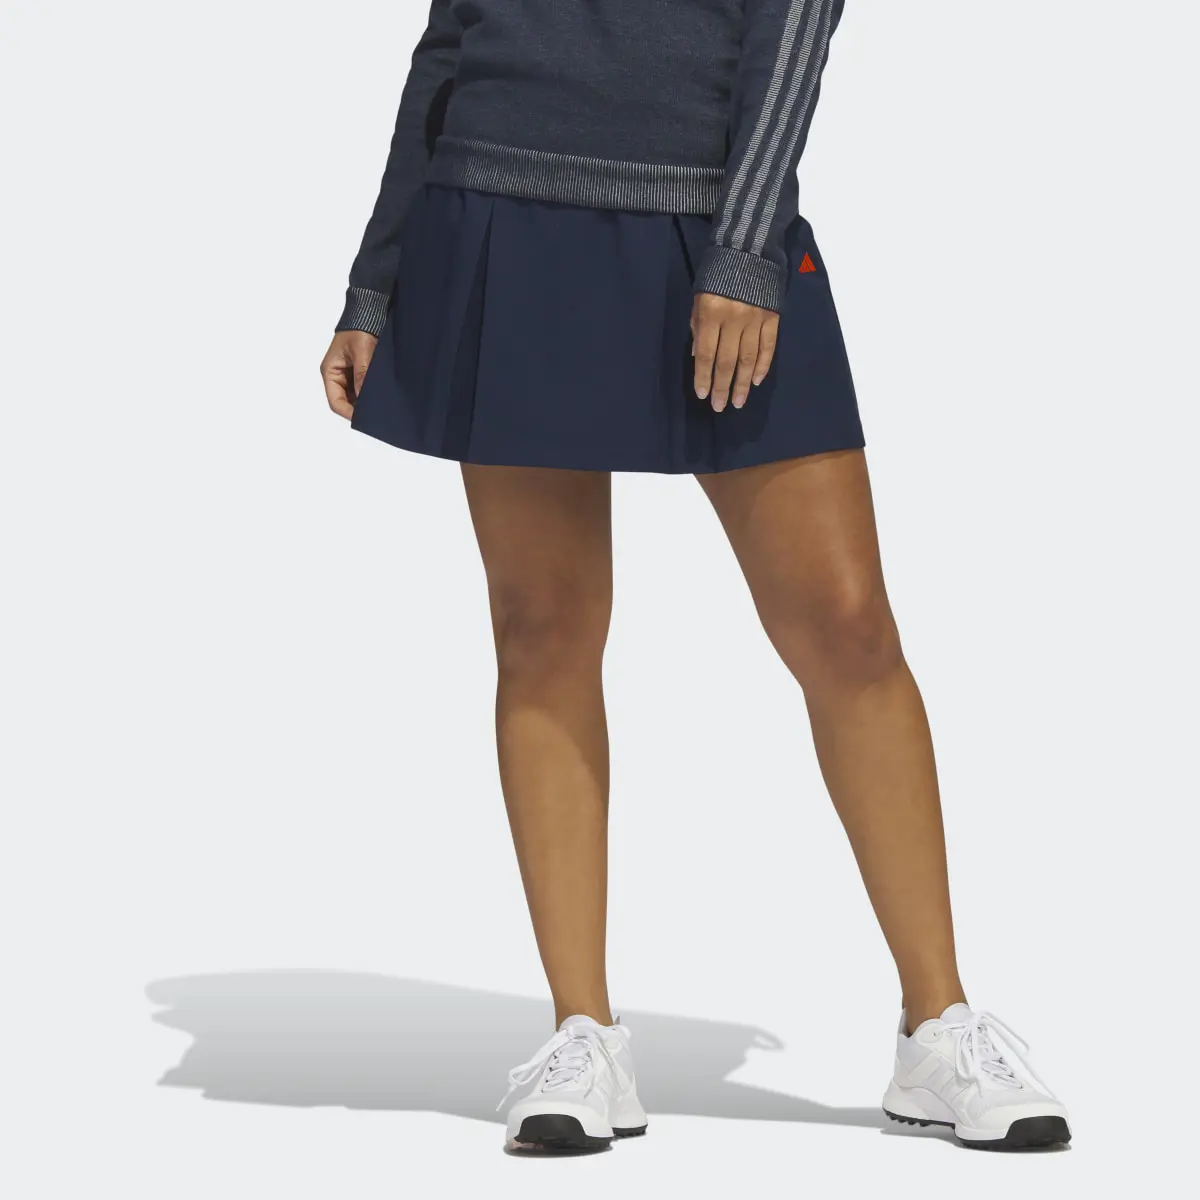 Adidas Made To Be Remade Flare Golf Skirt. 1